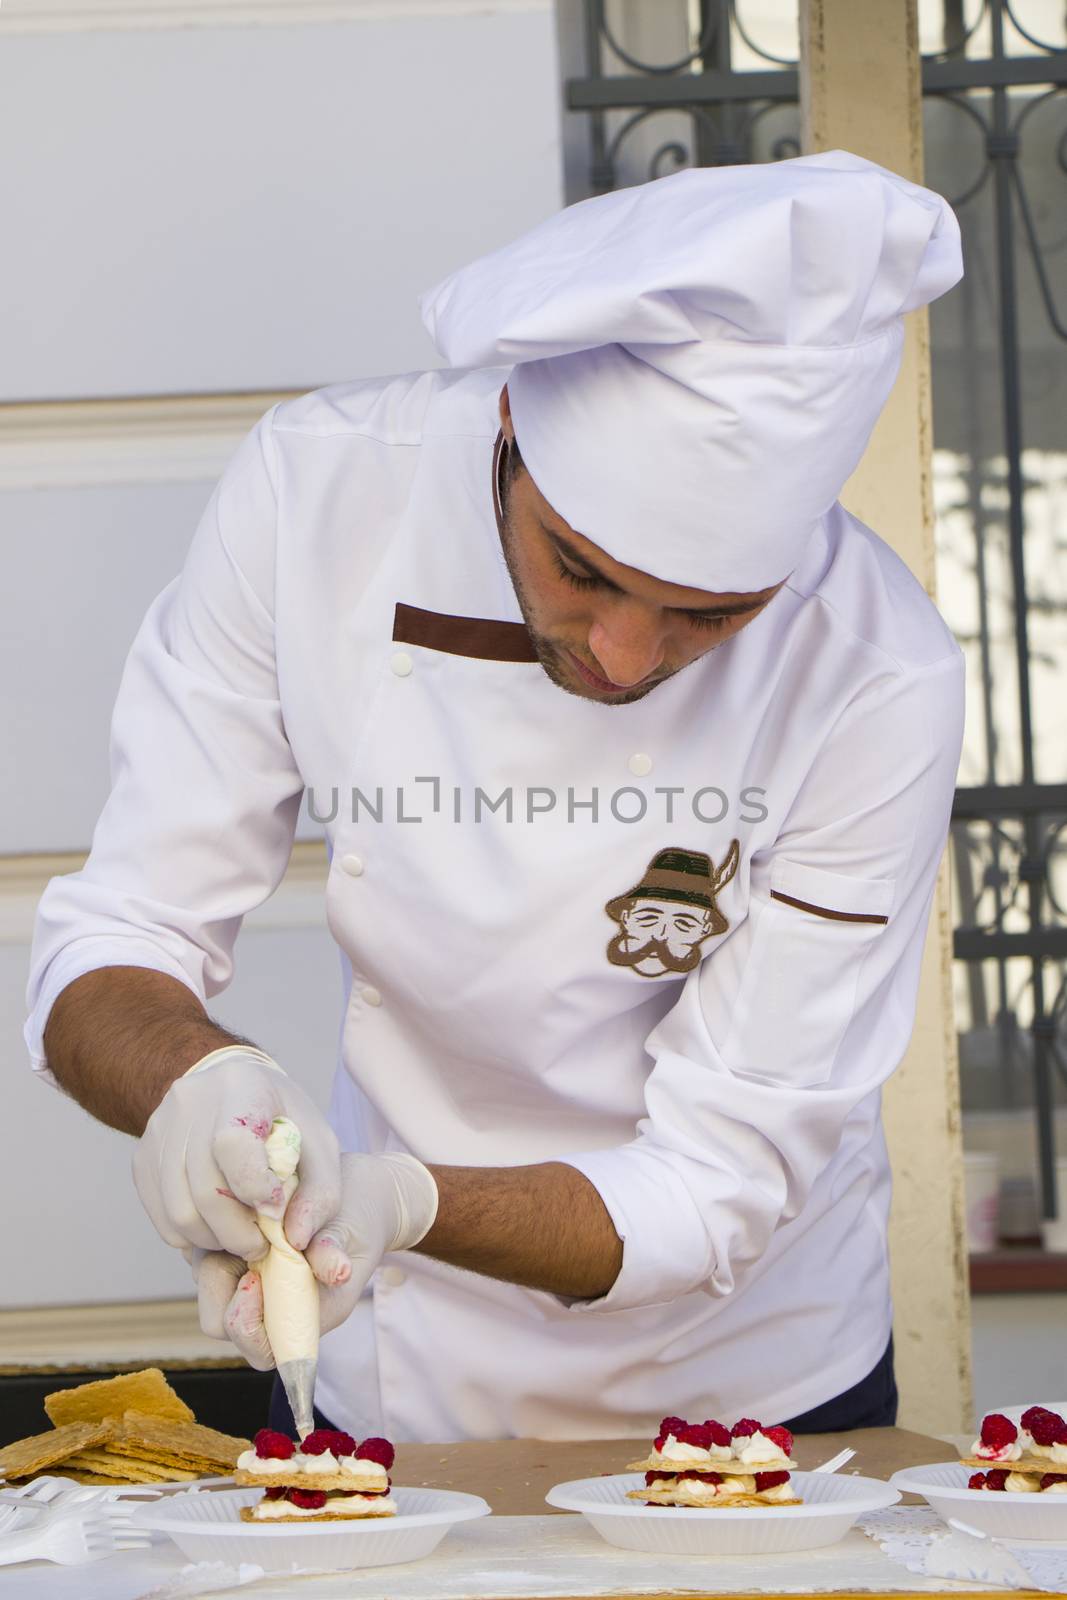 Confectioner chef cooking dessert scene, chef decorates cake and working in the street of Tbilisi on the city festival. by Taidundua